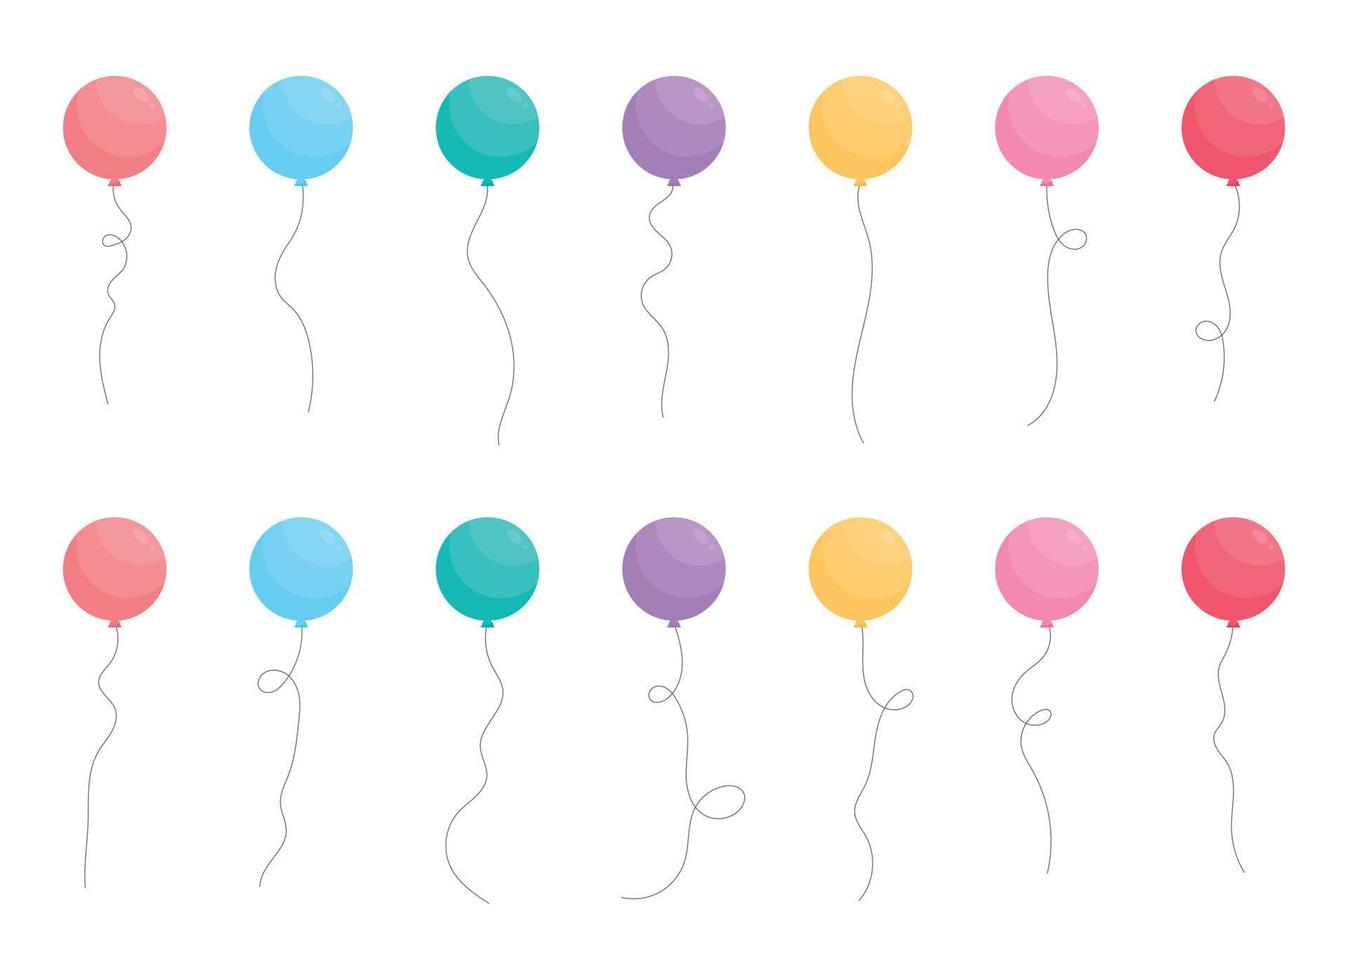 Set of colored party balloons tied with strings. Vector illustration in cartoon style